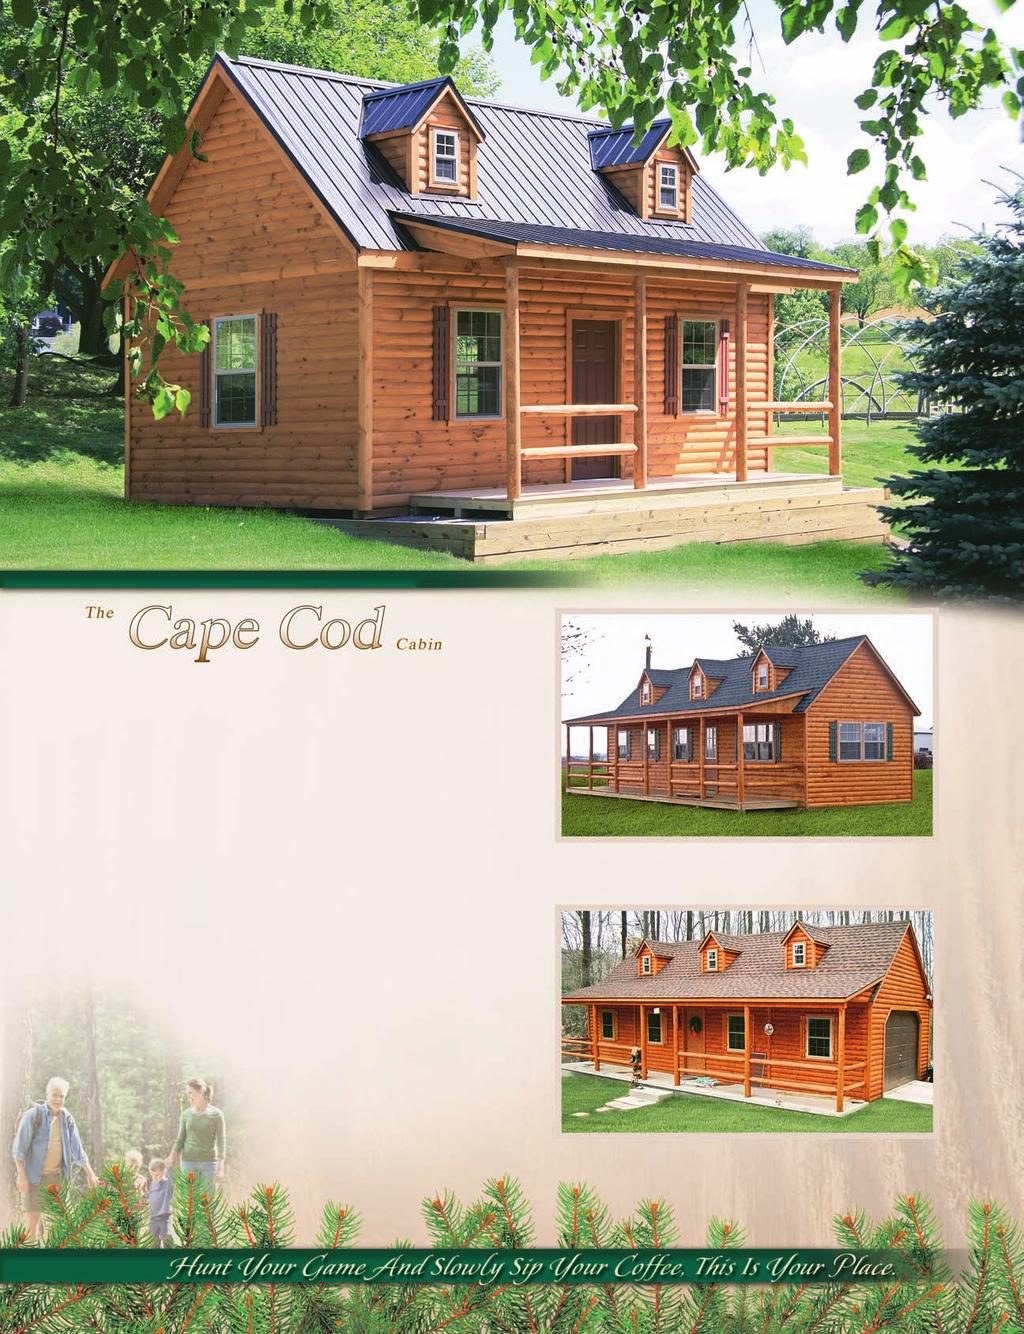 14' x 24' (plus a 5' x 20' porch) Cape Cod The Cape Cod boasts a beautiful front porch, steep roof, and dormers.